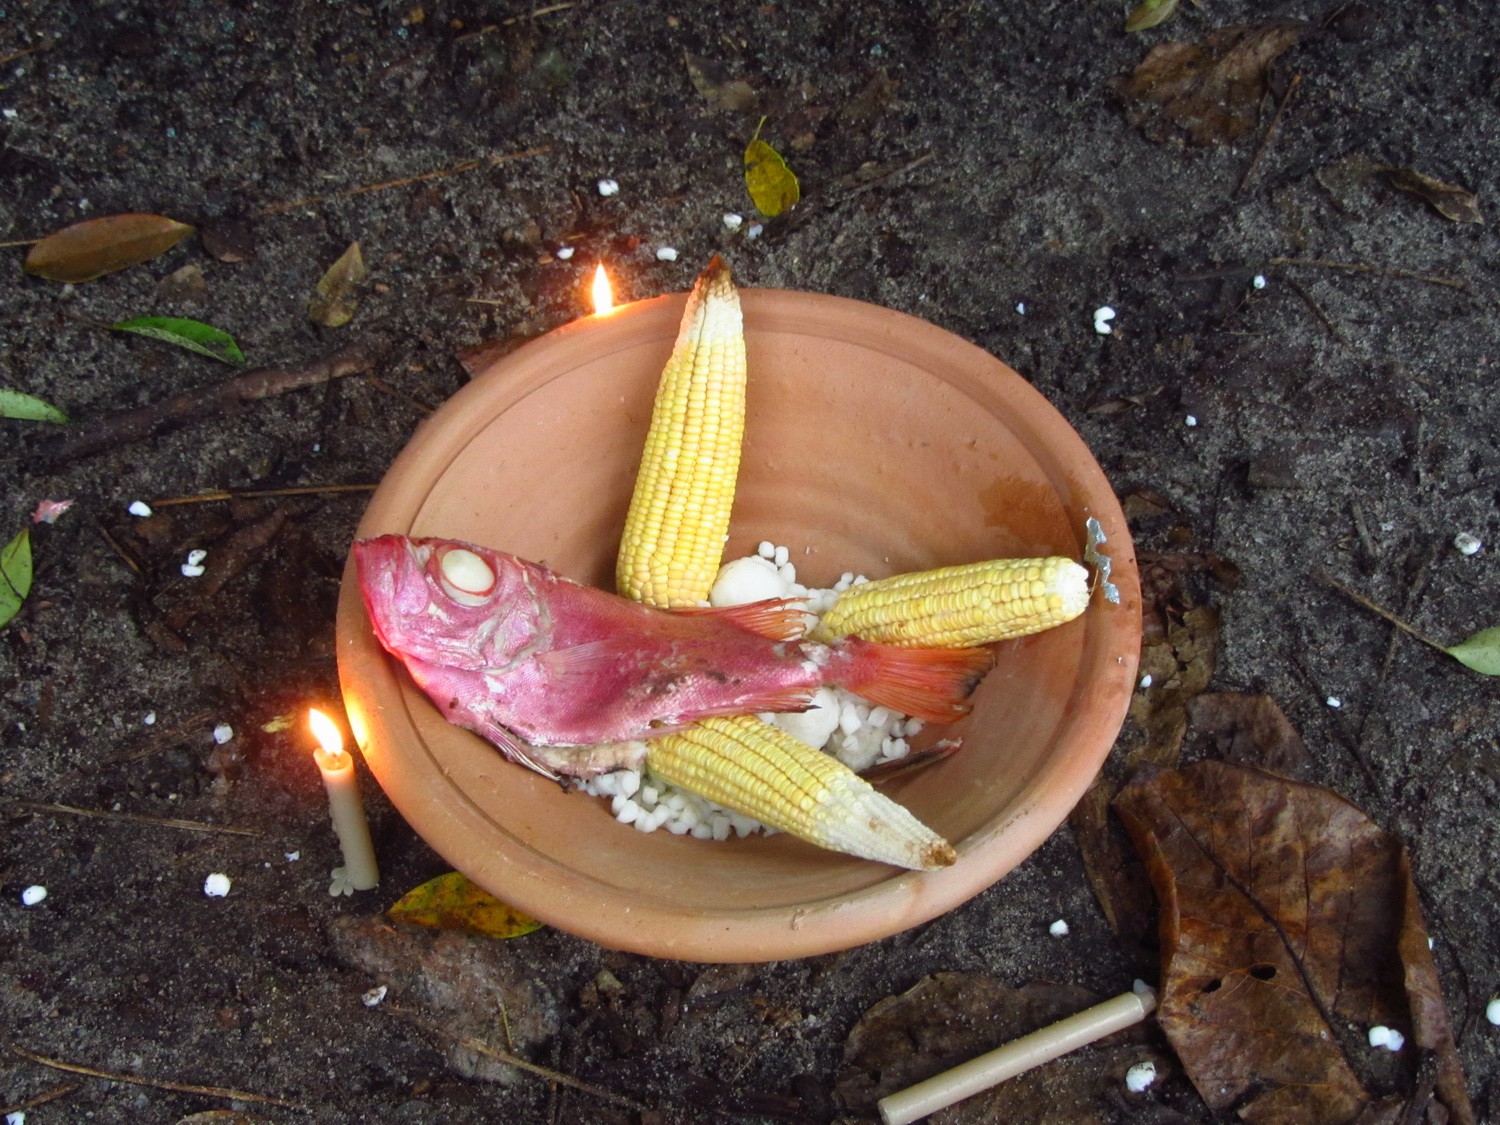 Offerings to a Orixa, a god of the Afro-Brazilian Candomble religion